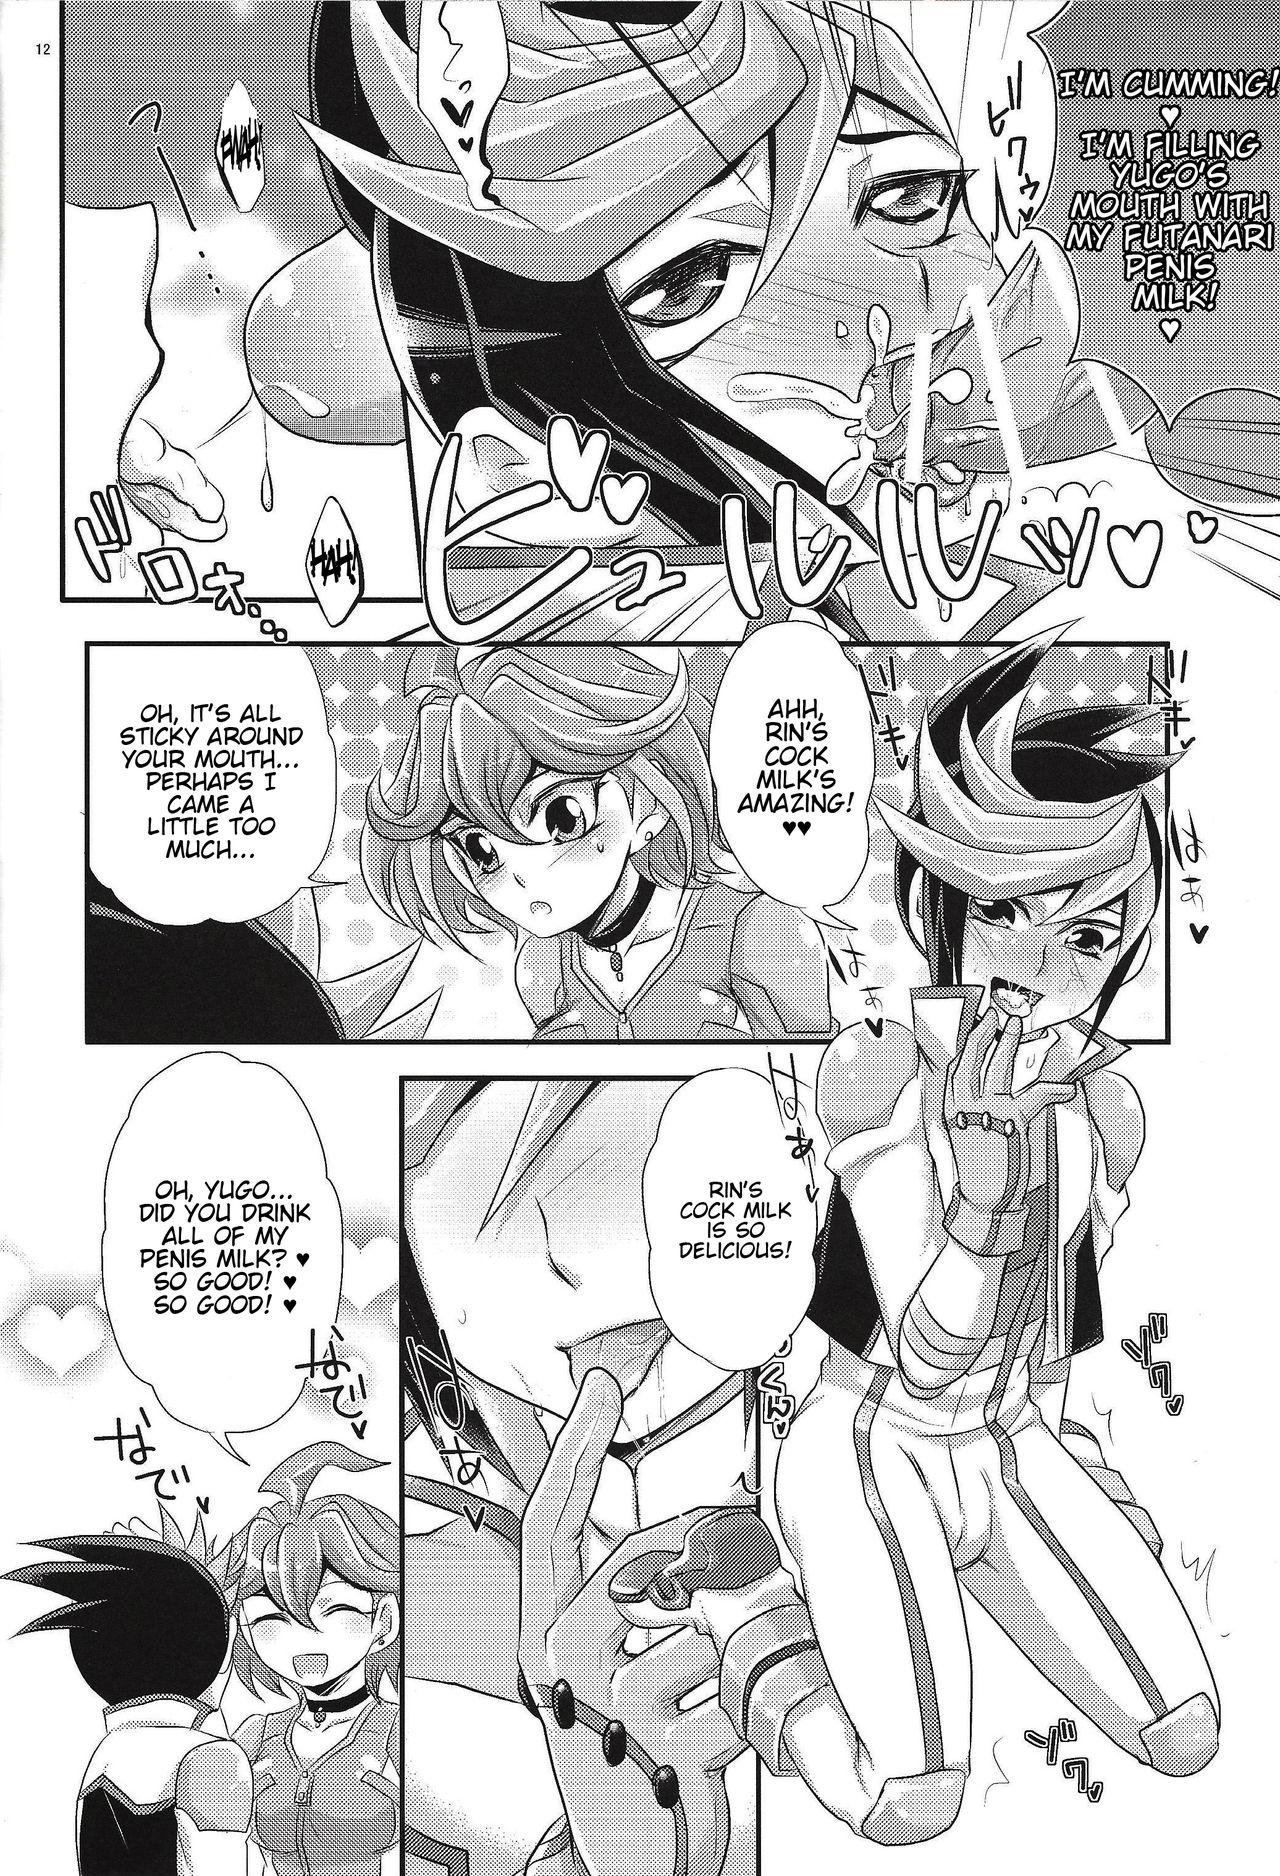 Exhibition ACME of Smile! - Yu-gi-oh arc-v Piercing - Page 11